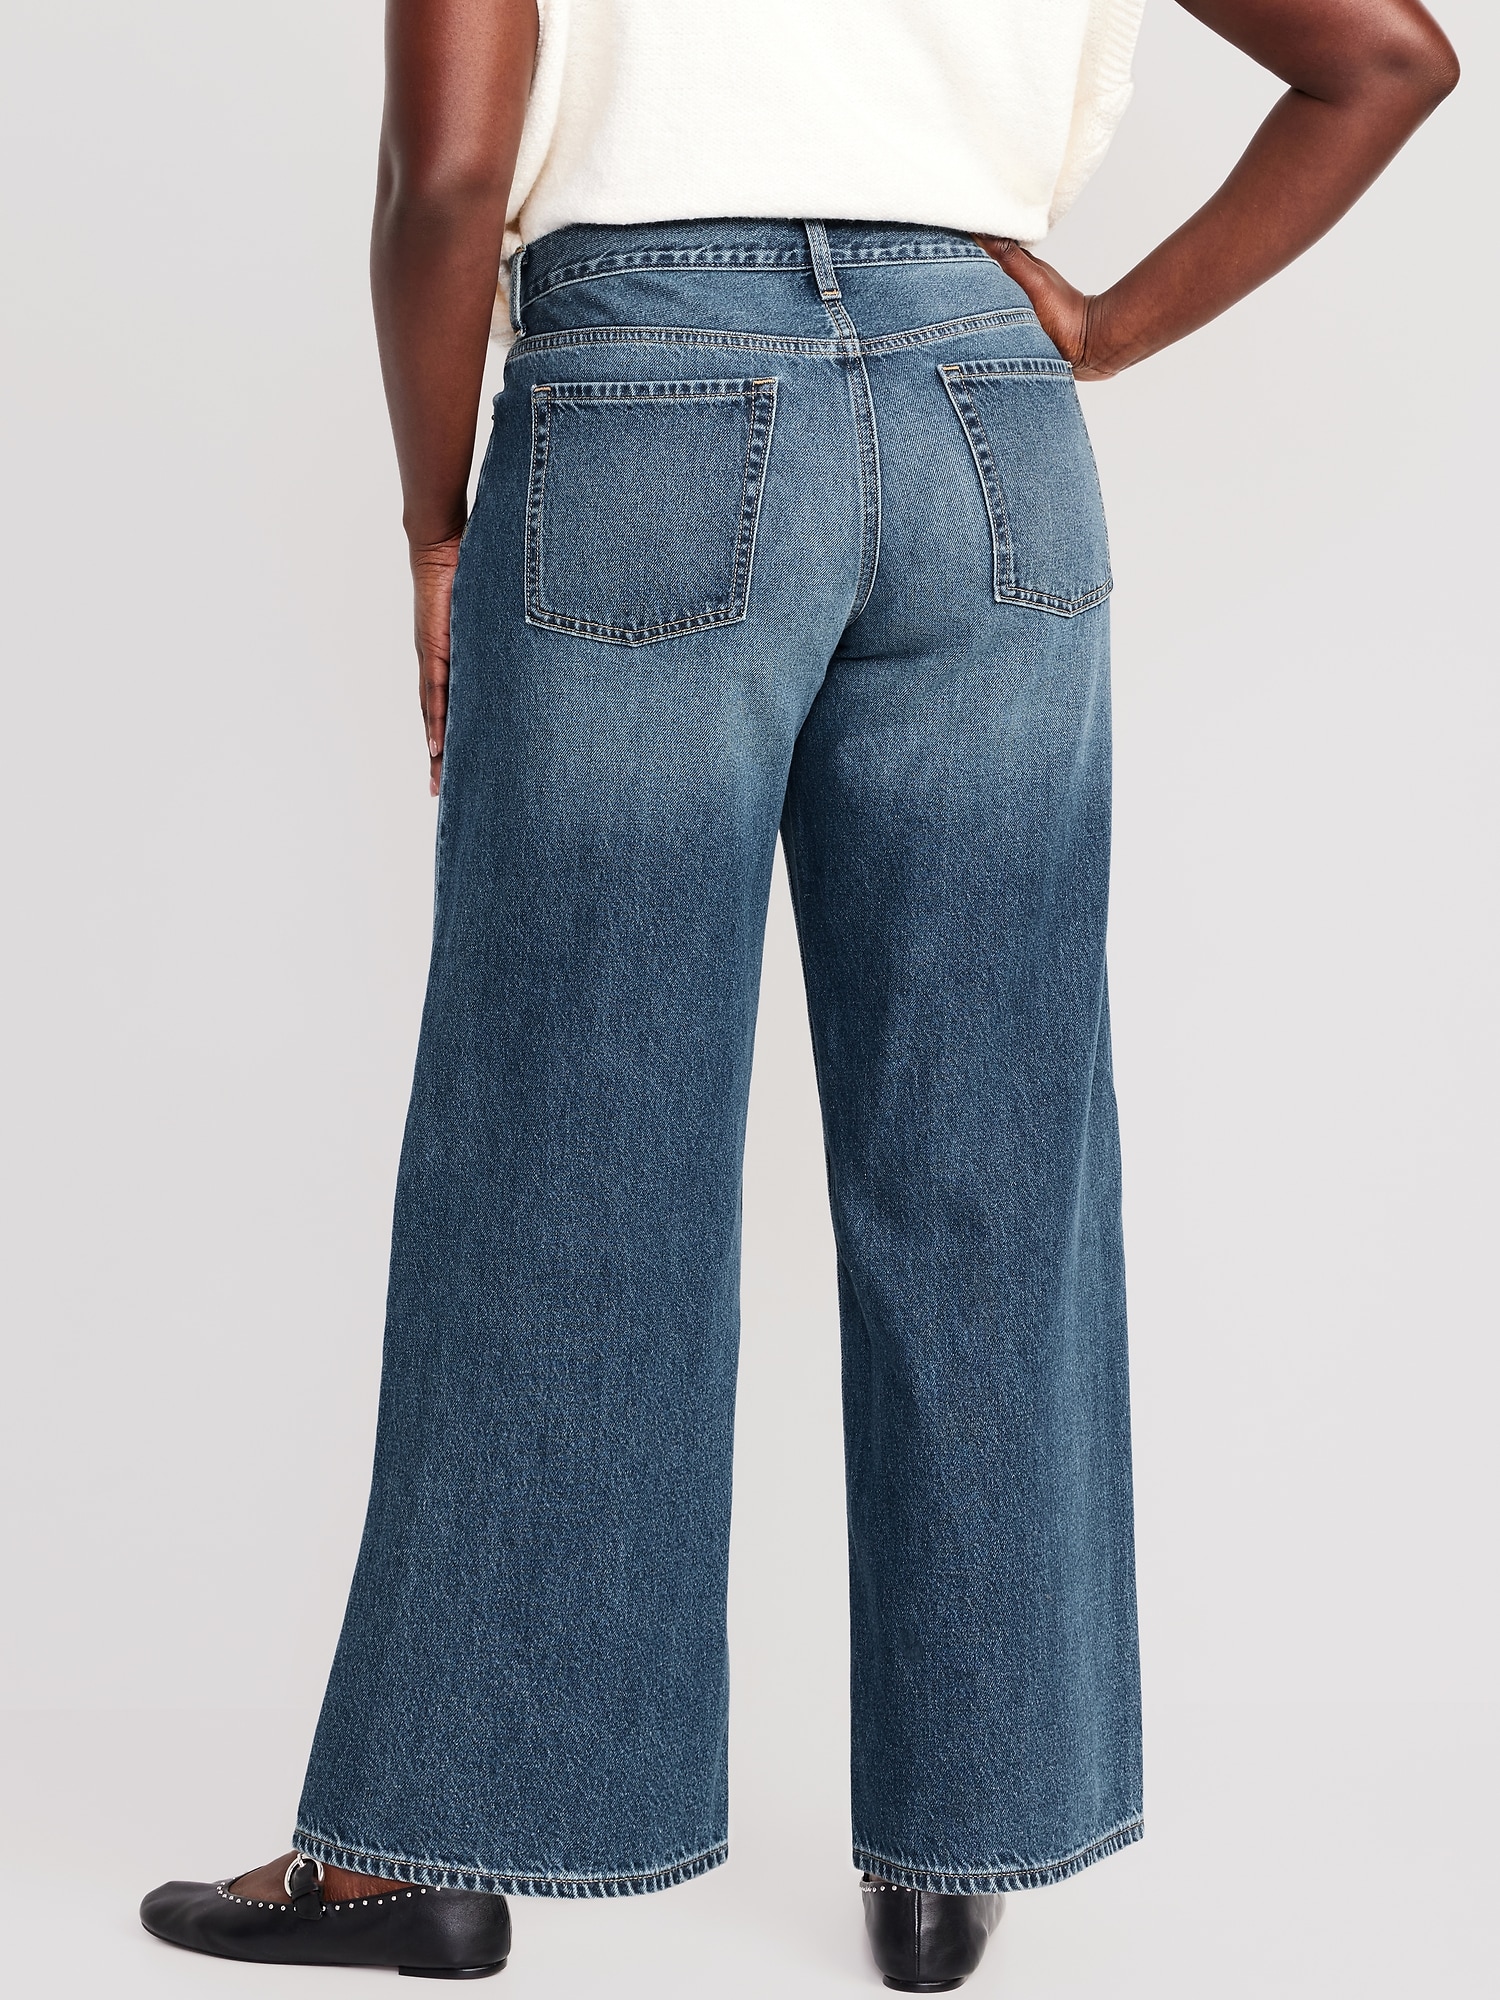 Blue Cropped jeans – Adoro